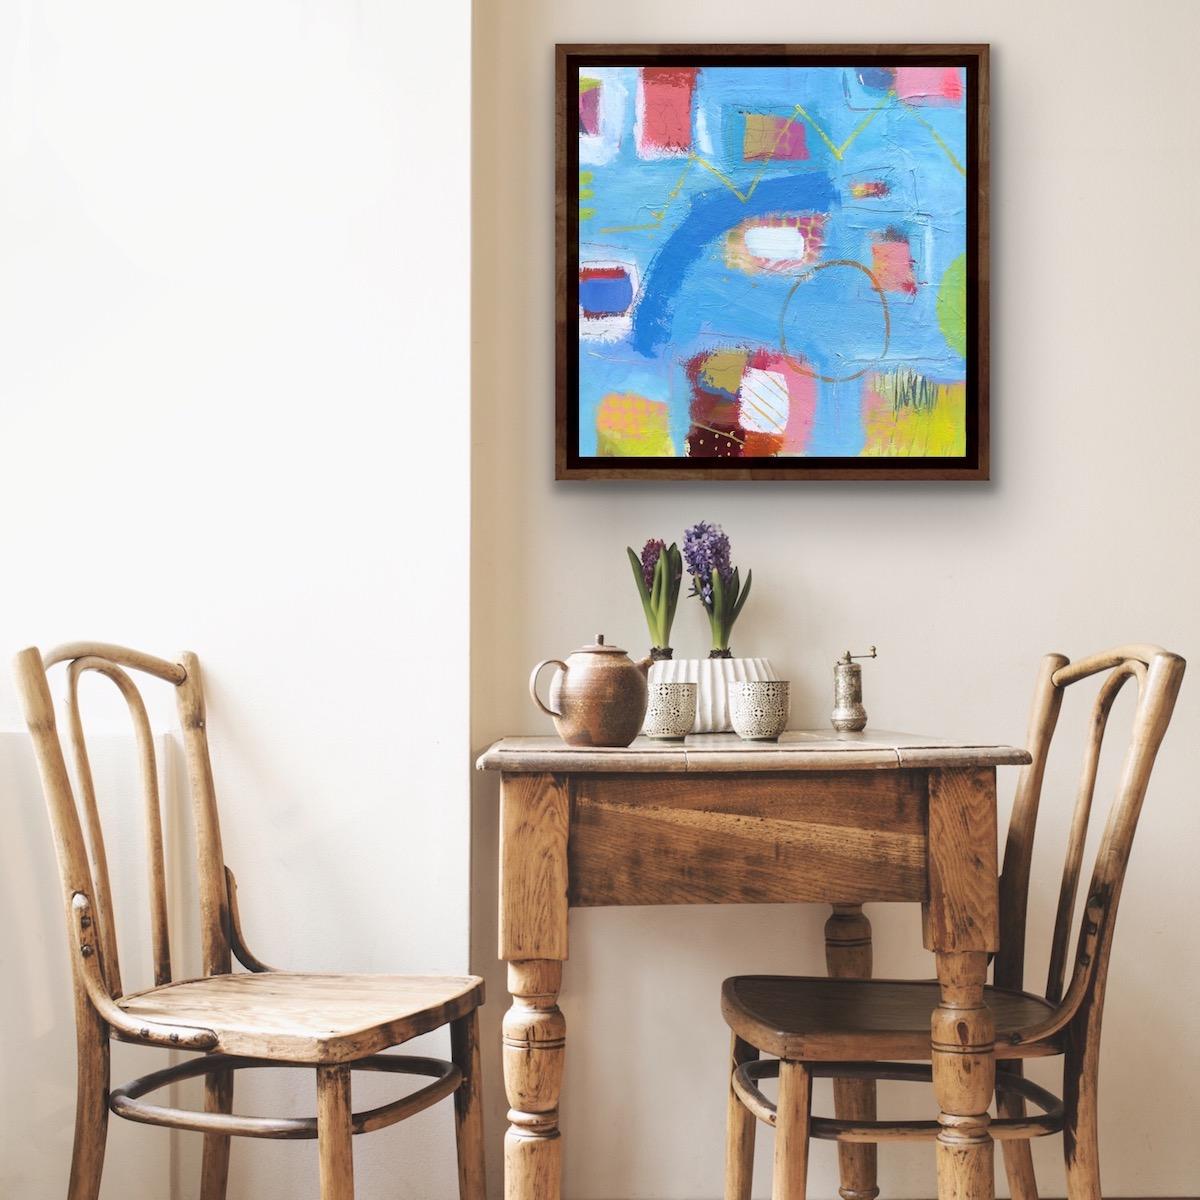 Montana Melody 2, Bright Mixed Media Contemporary Abstract Art, Original art - Painting by Maggie LaPorte Banks